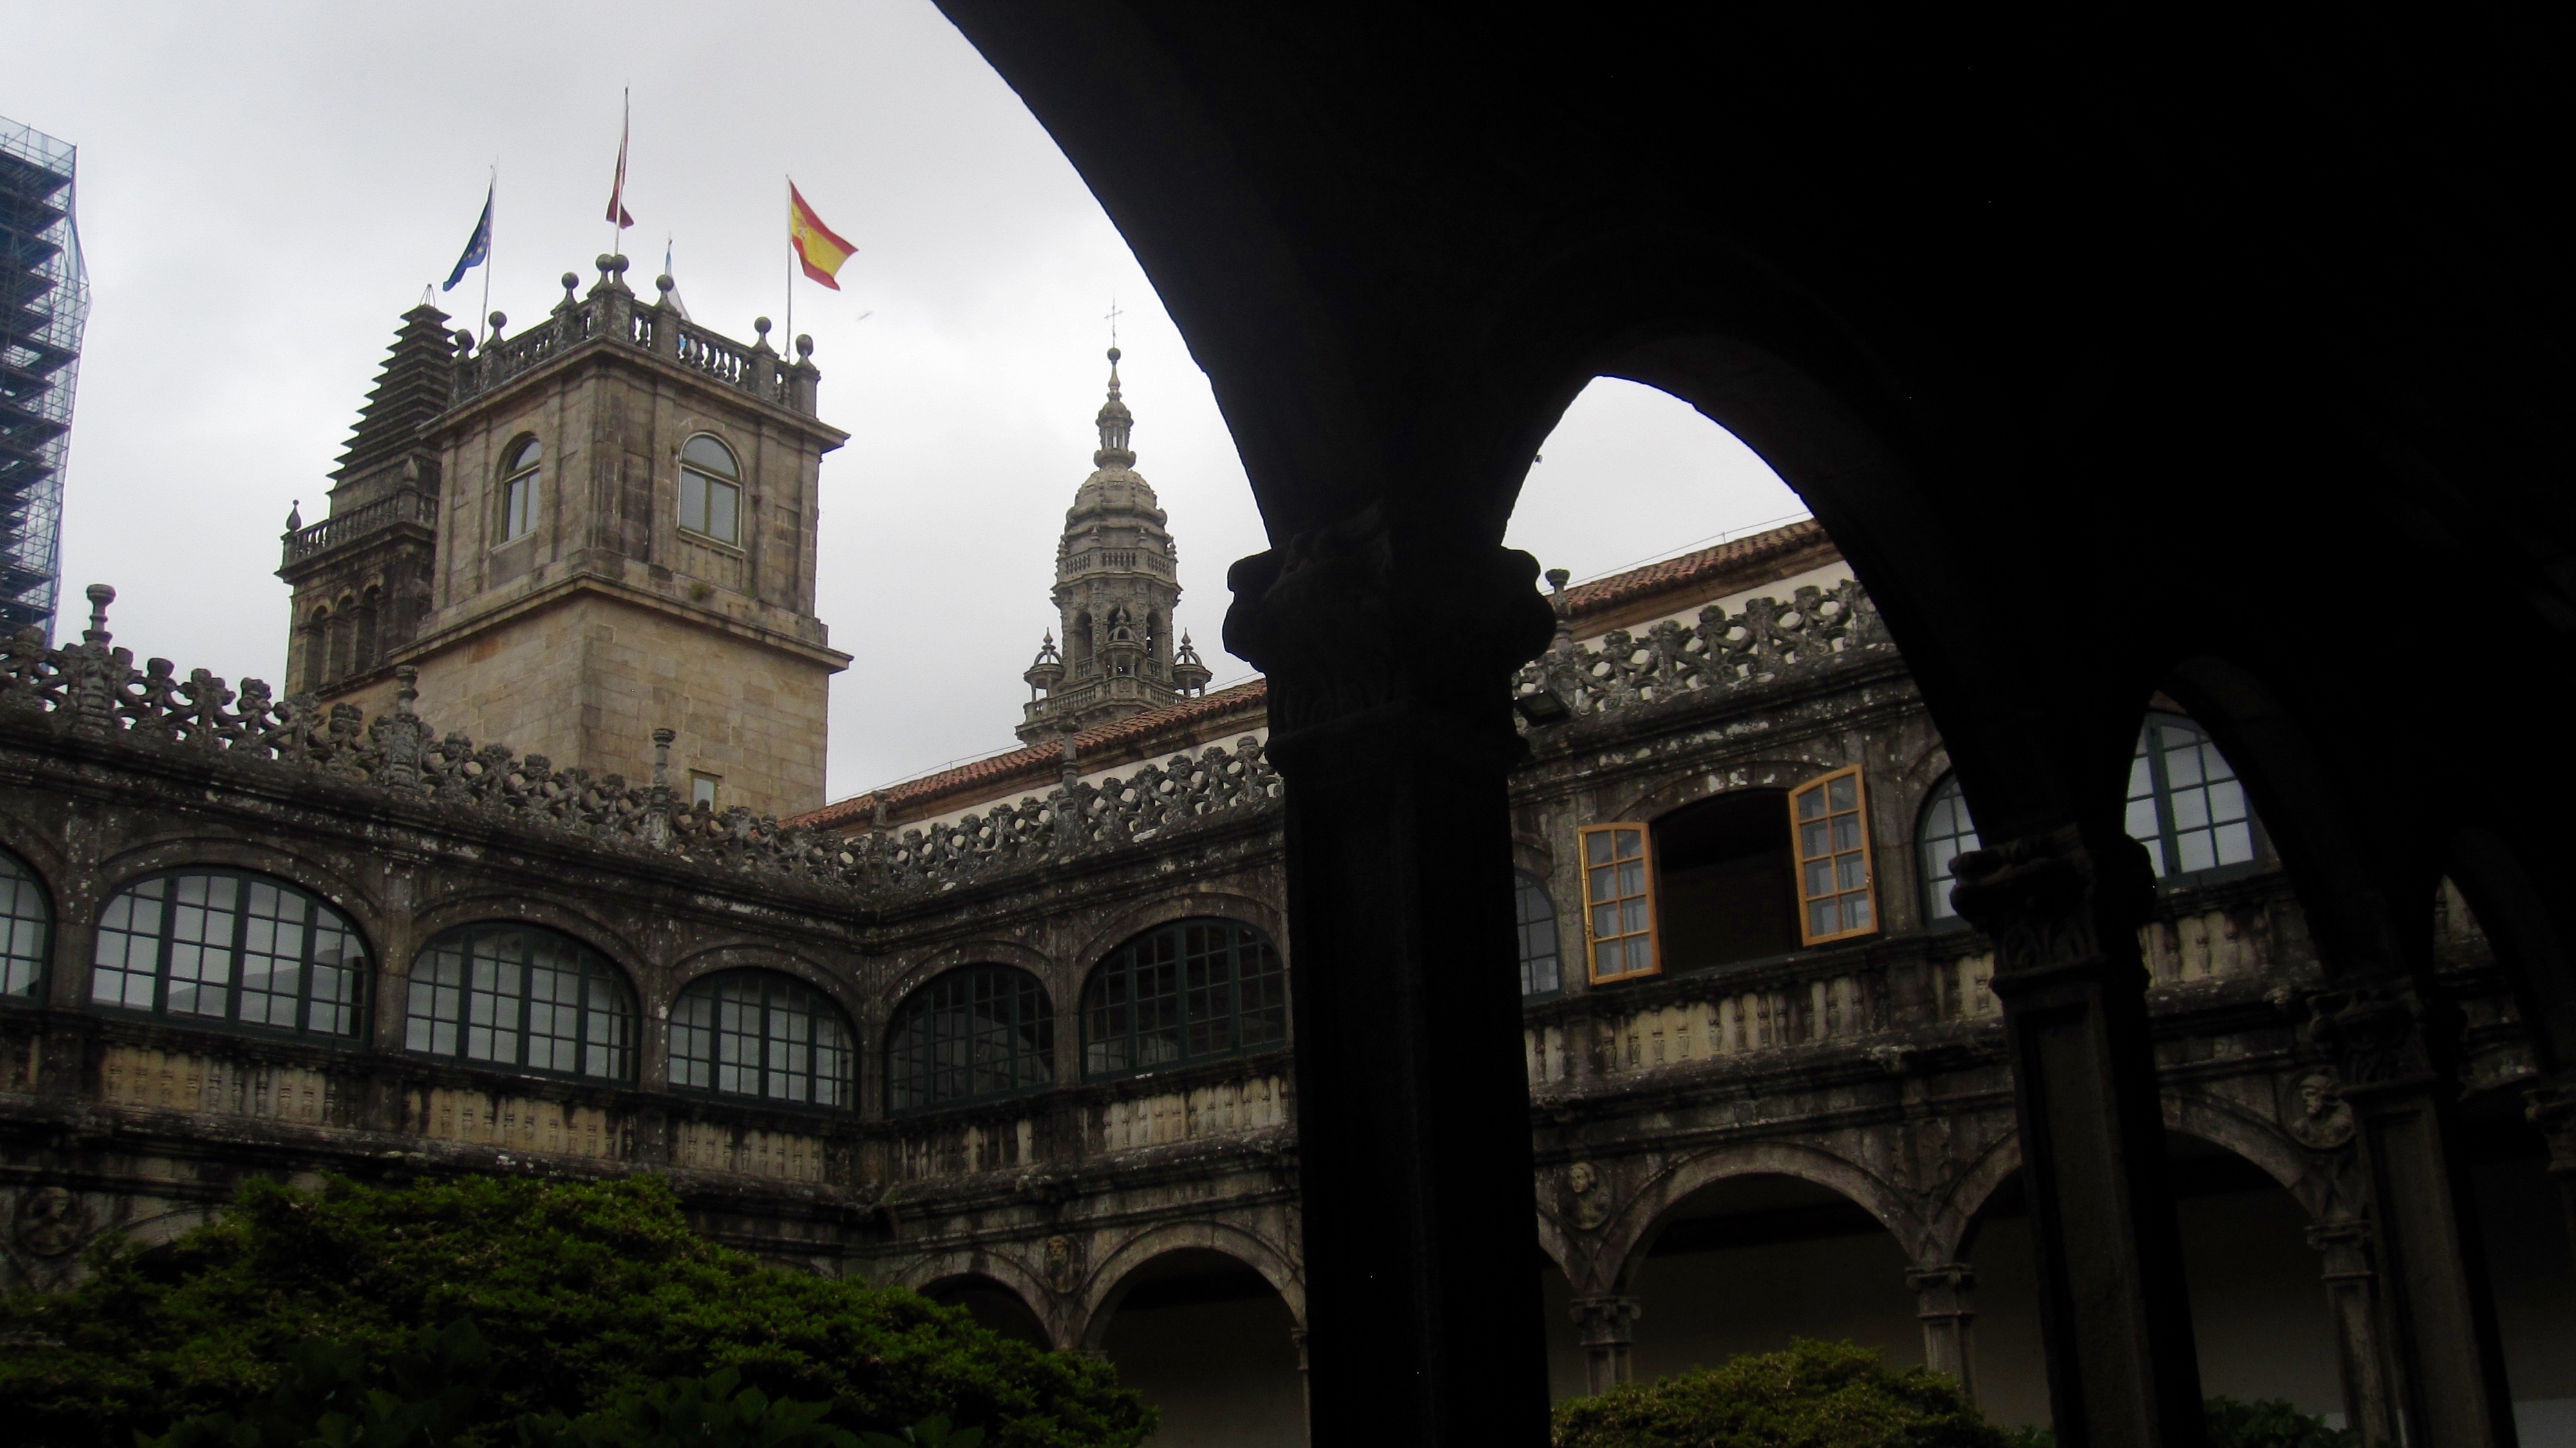 View from the interior court of the university to the different towers of the Cathedral